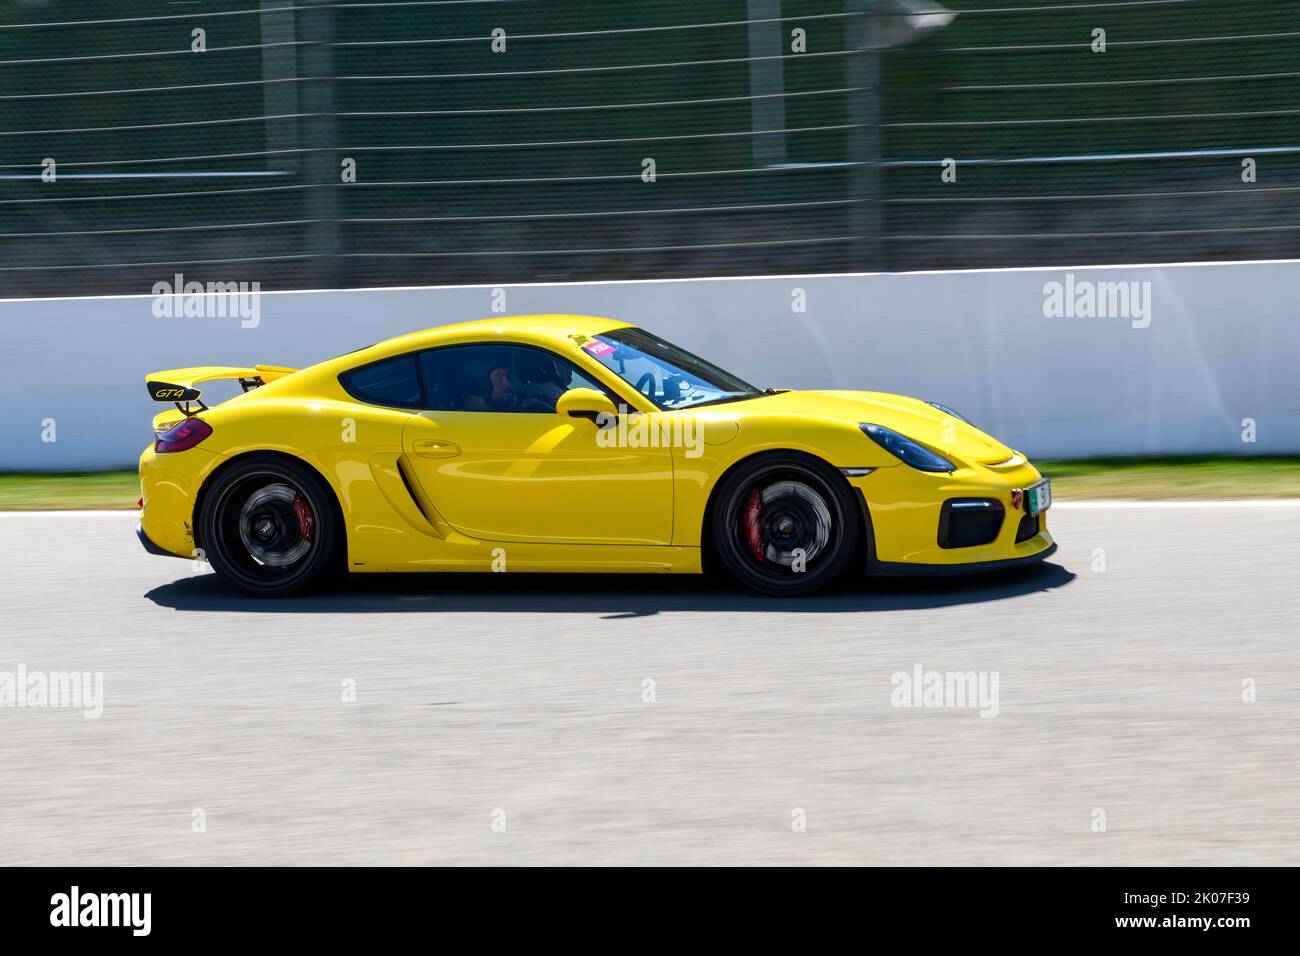 Yellow racing car sports car Porsche Cayman GT4 races at high speed top speed during trackday on start-finish straight of race track, FIA Formula 1 Stock Photo